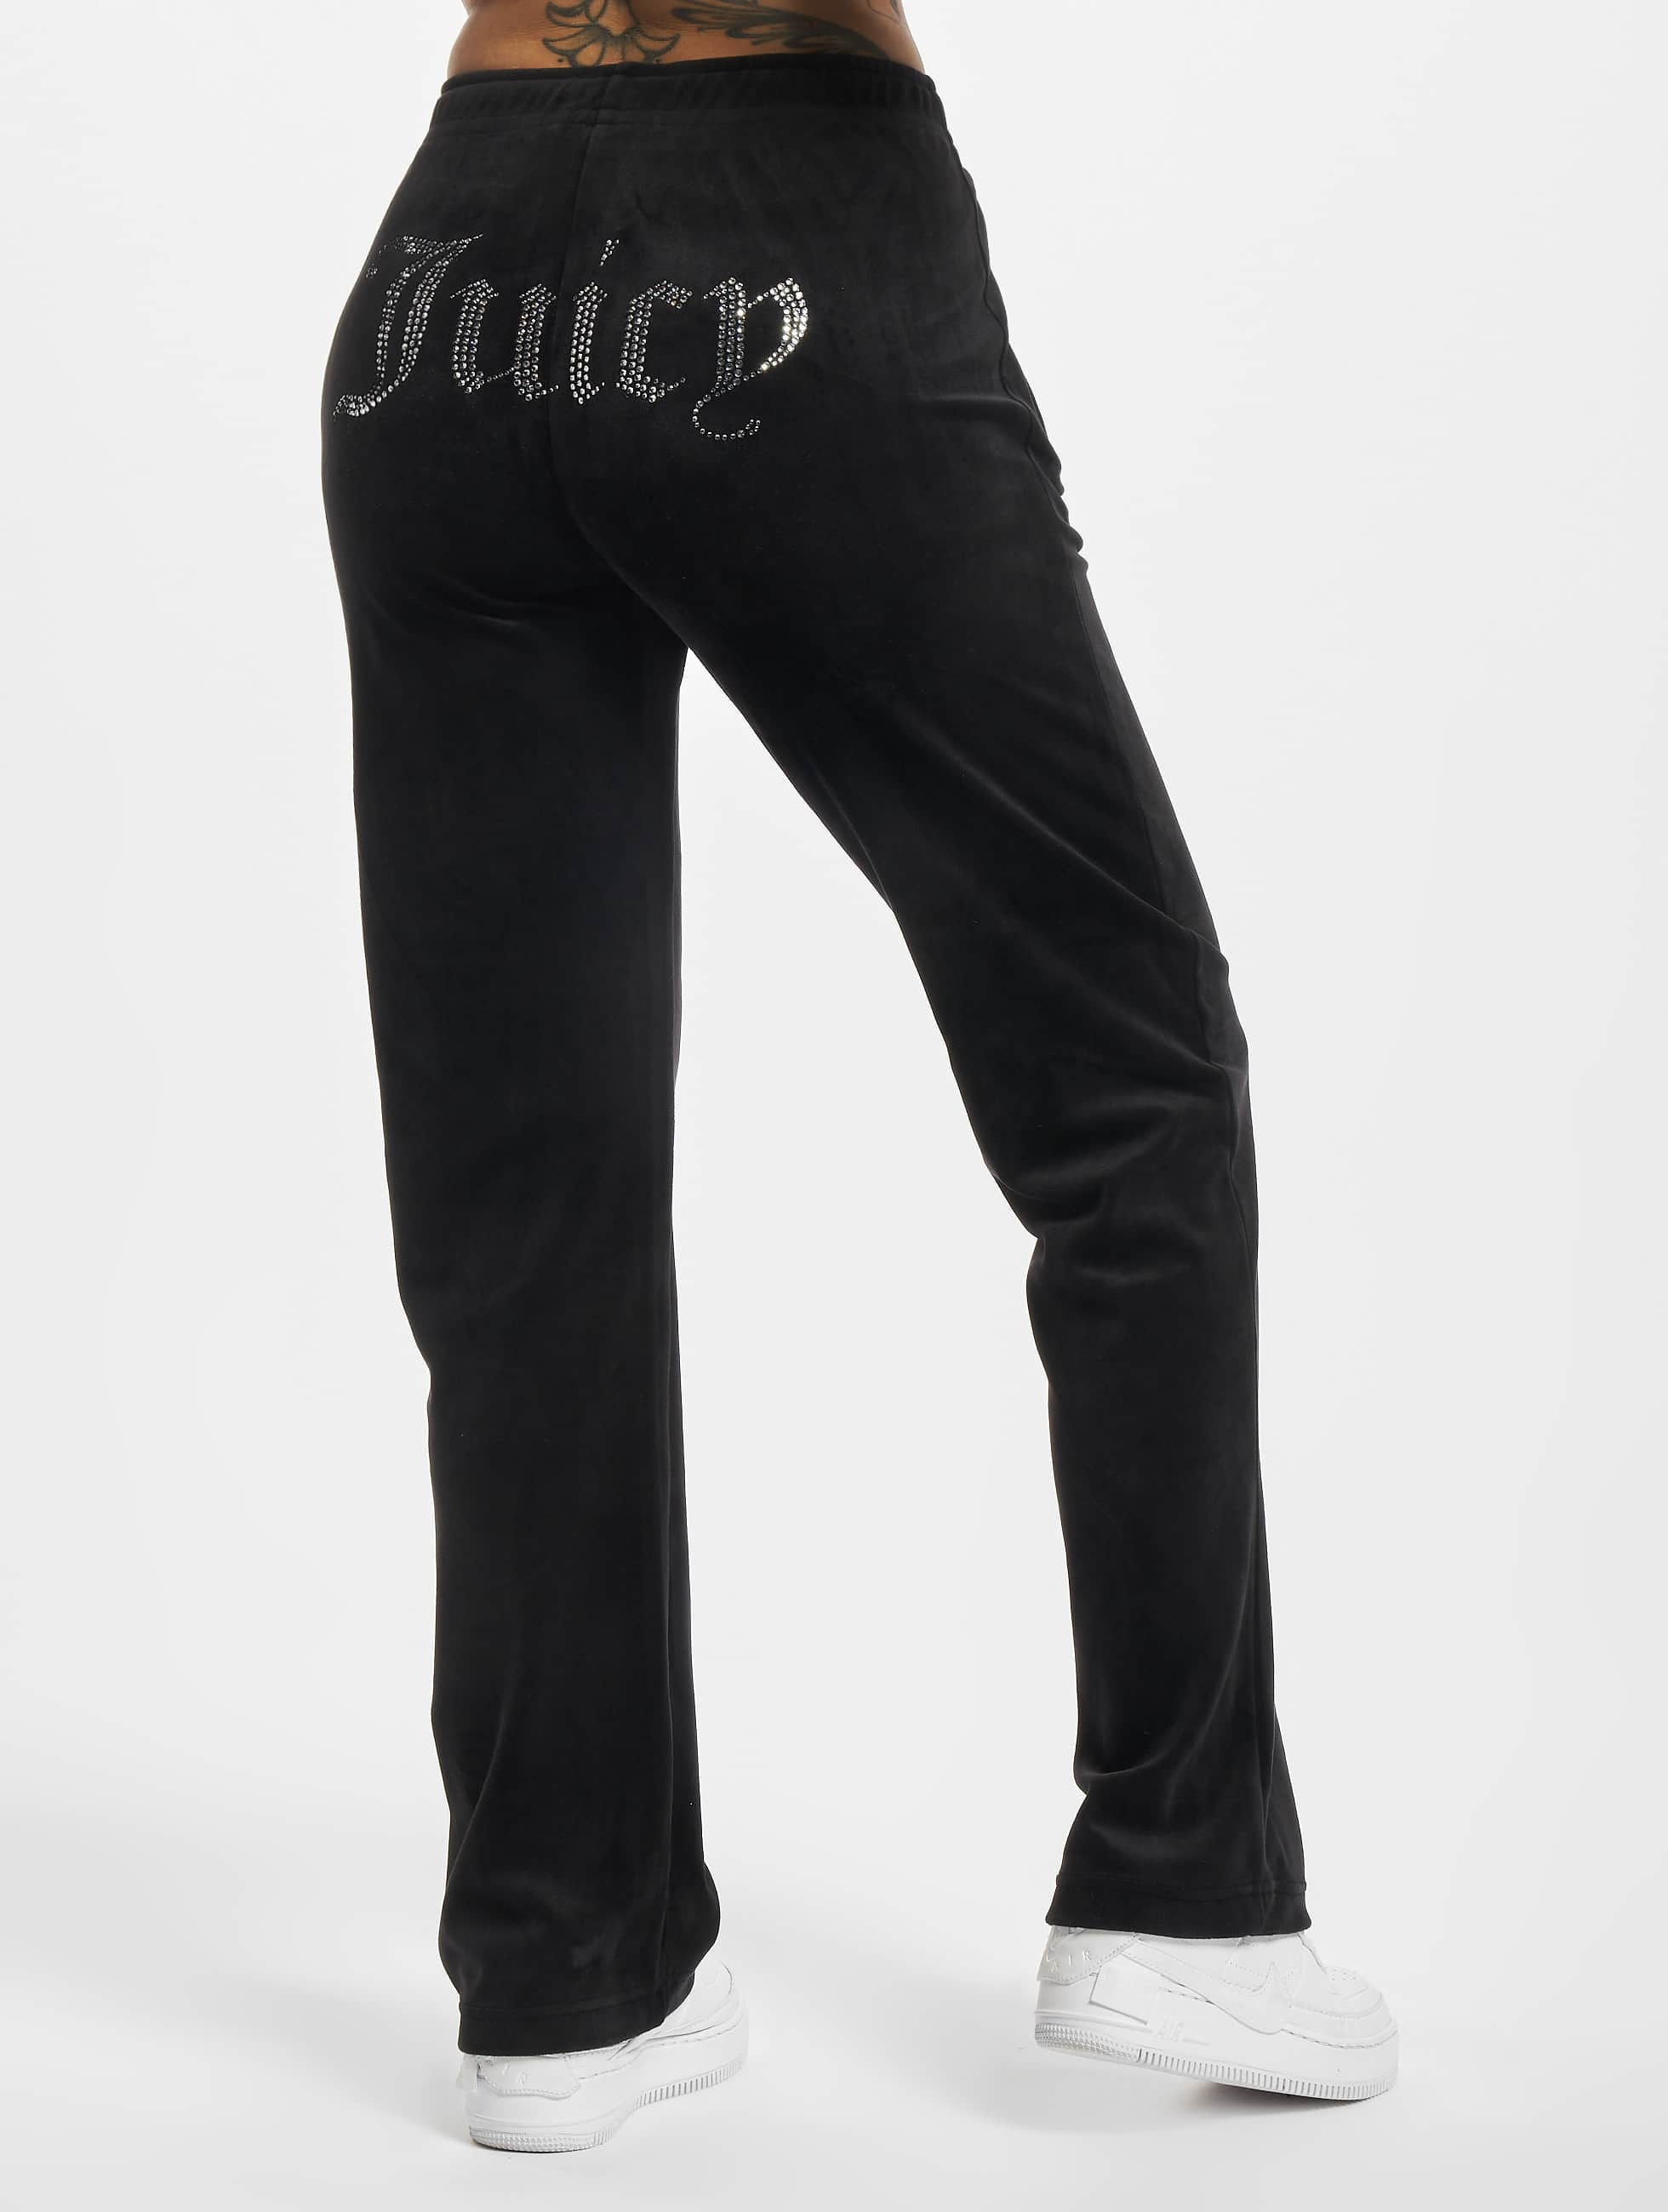 Juicy couture black label juicy cameo velour del rey pant pitch pink